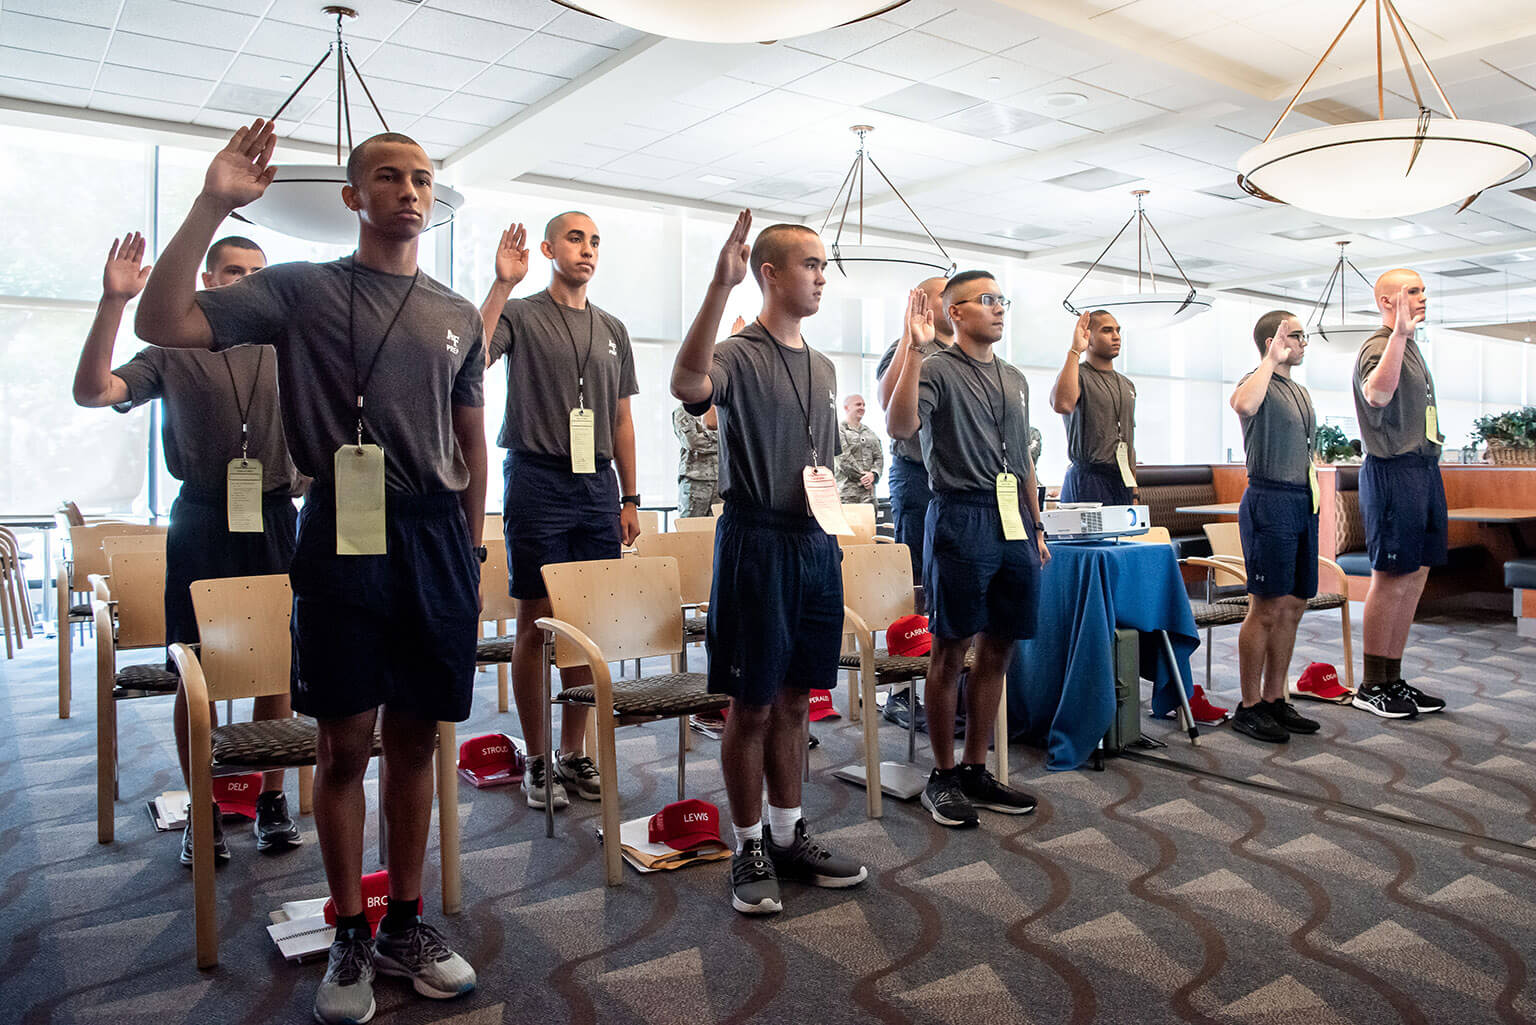 U.S. Air Force Academy Preparatory School cadet candidate take the Oath of Enlistment